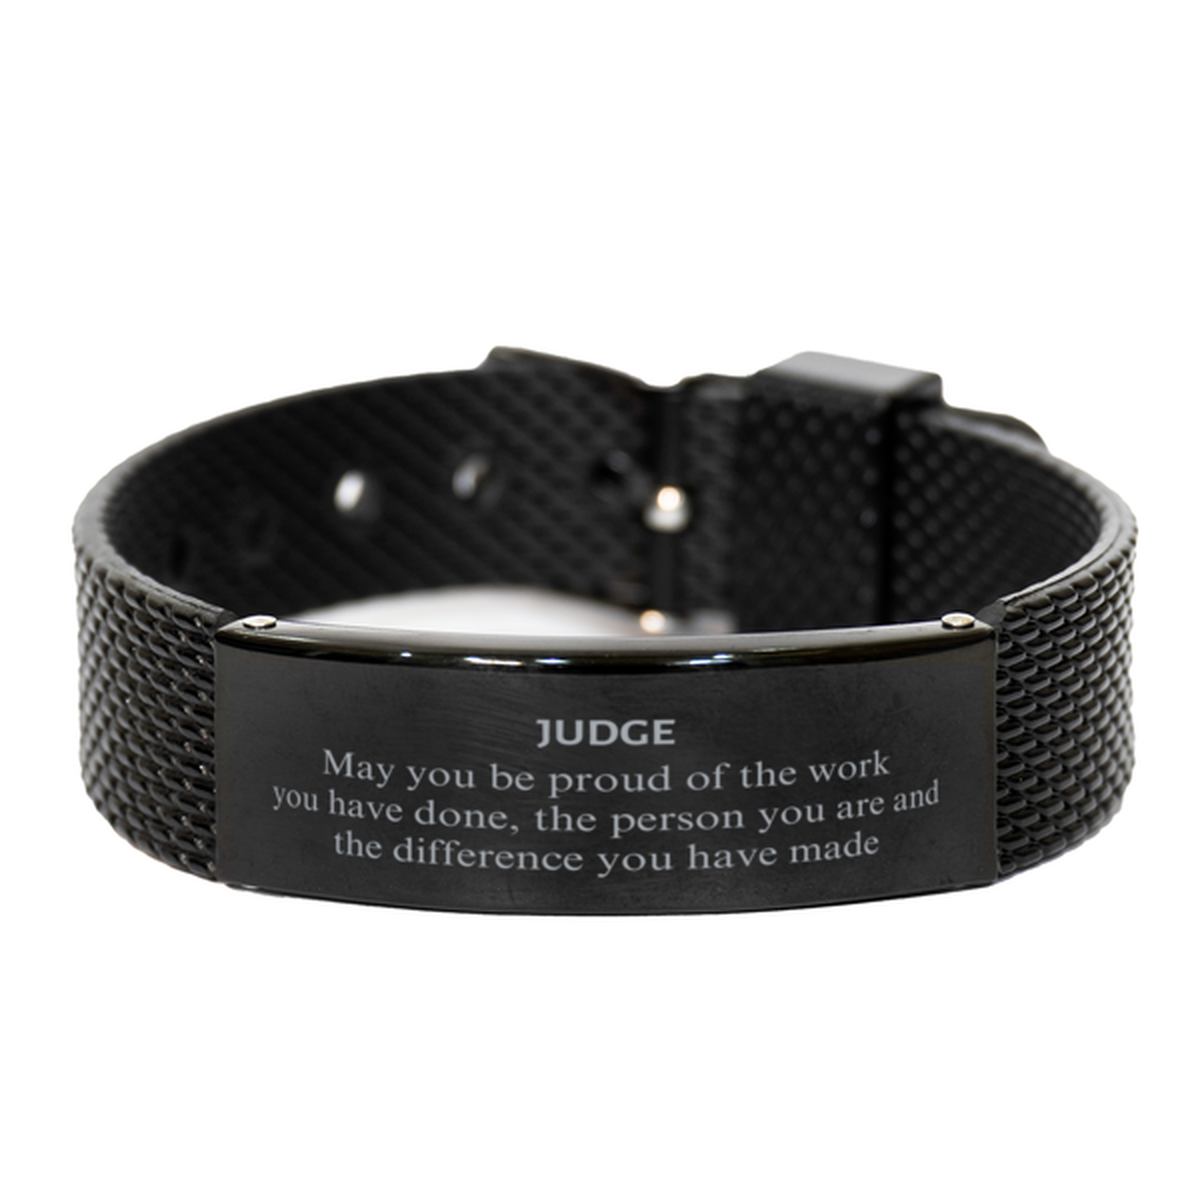 Judge May you be proud of the work you have done, Retirement Judge Black Shark Mesh Bracelet for Colleague Appreciation Gifts Amazing for Judge